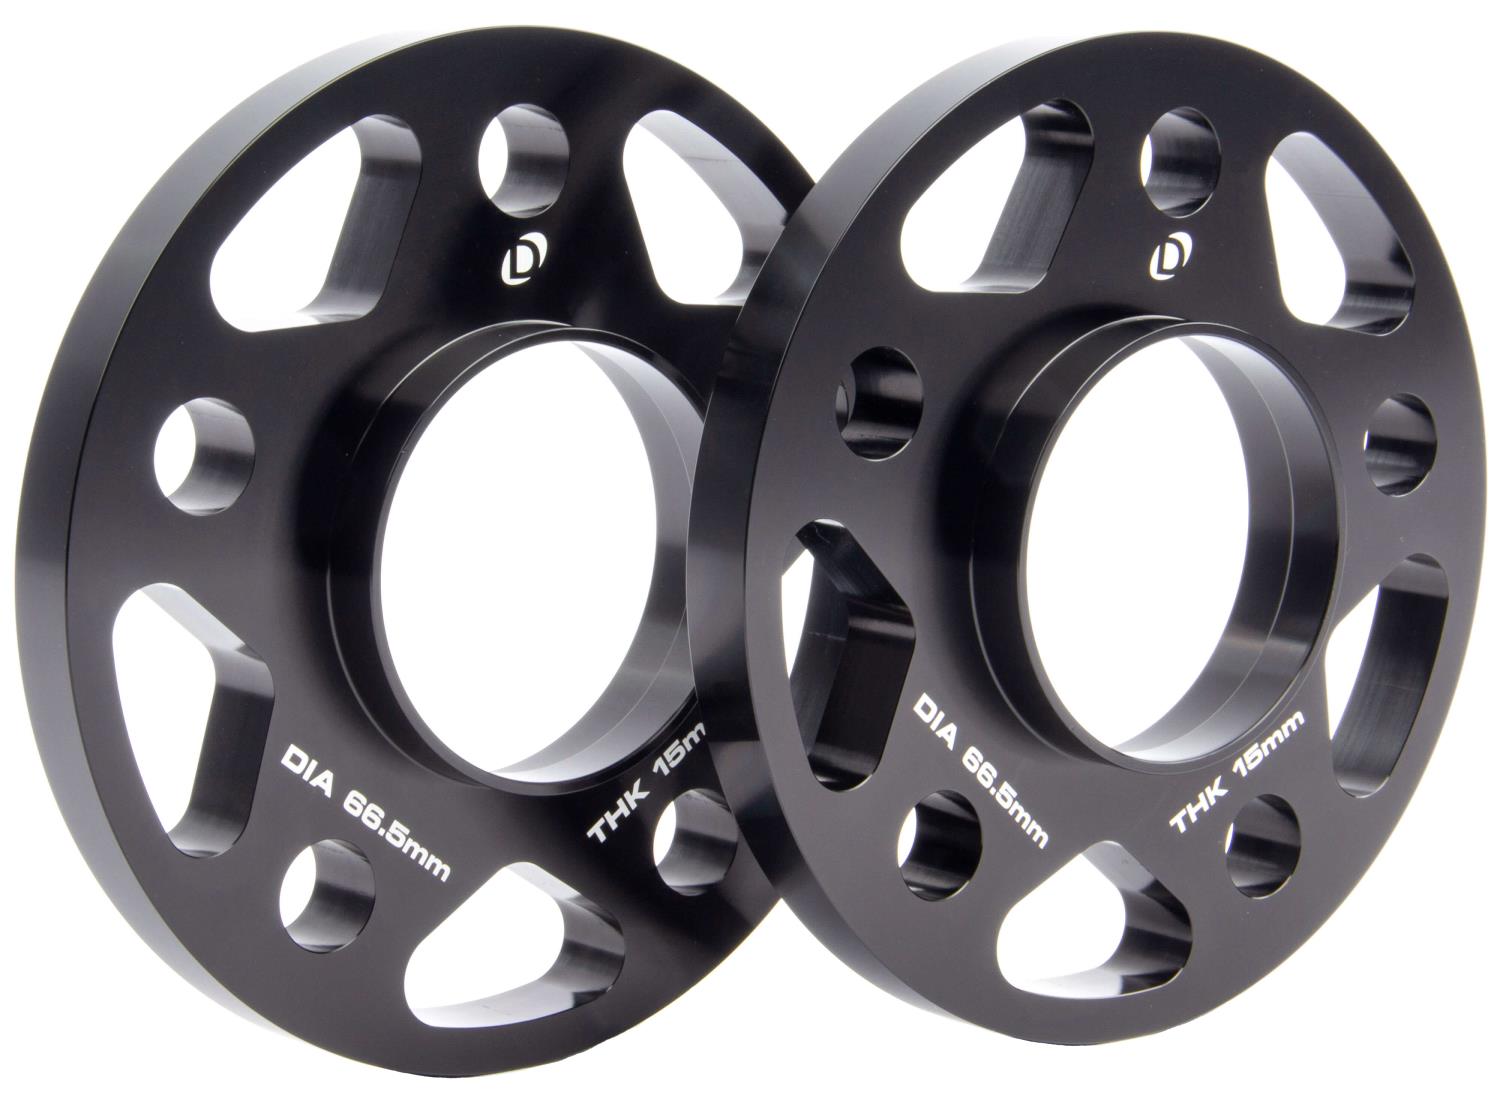 Machined  Aluminum Wheel Spacers [15 mm Thick] for Select Late-Model BMW Cars/SUVs, Mini Cooper, Toyota GR Supra  [Black]